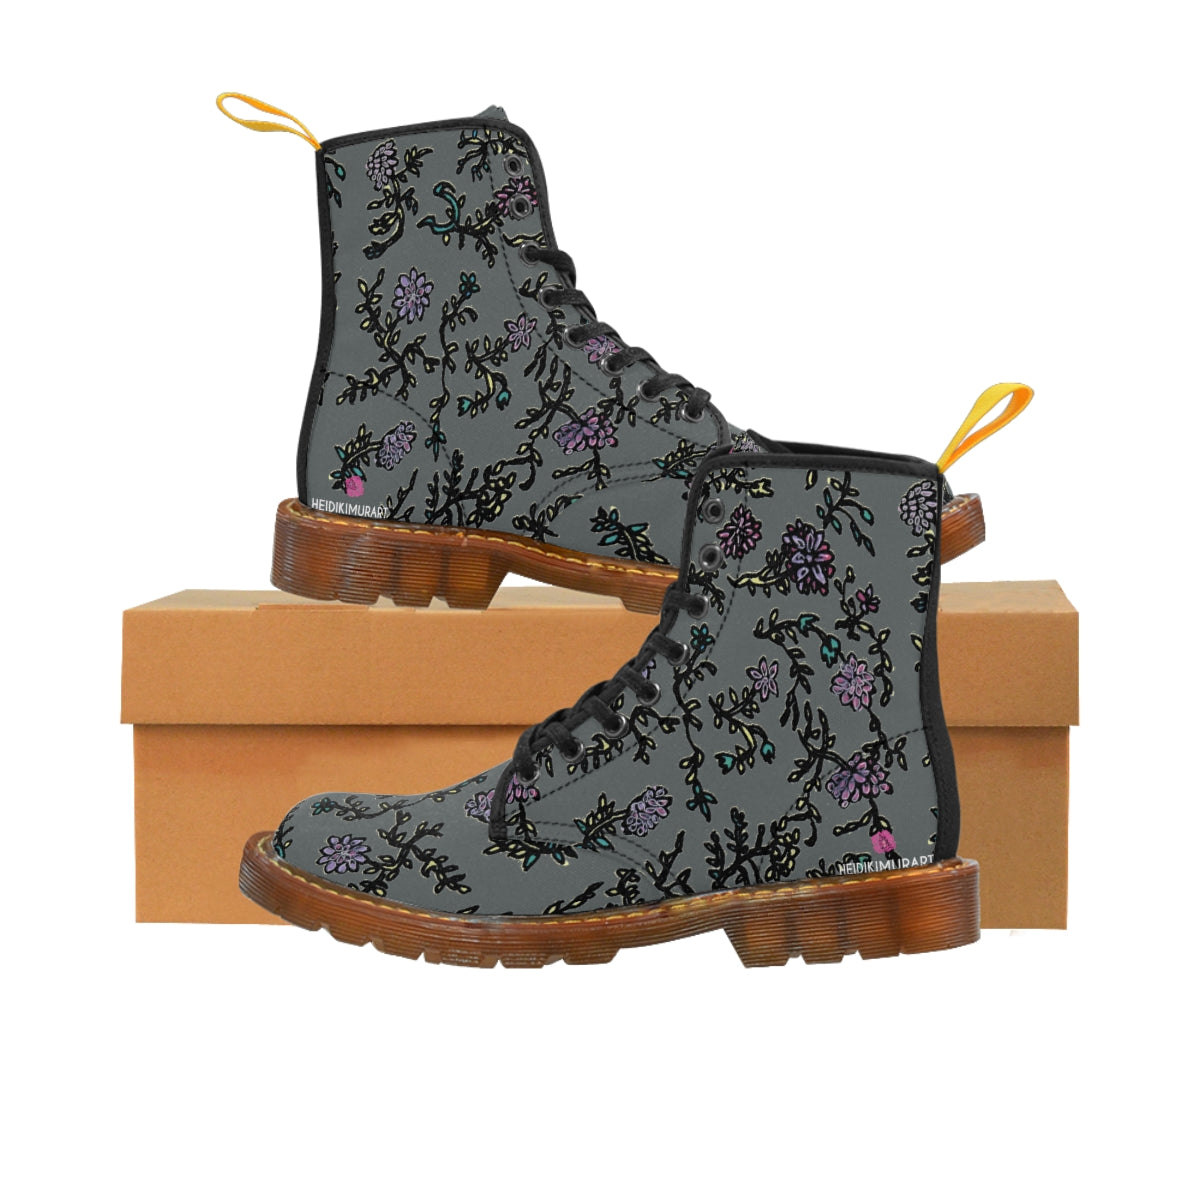 Grey Floral Print Women's Boots, Purple Floral Women's Boots, Flower Print Elegant Feminine Casual Fashion Gifts, Flower Rose Print Shoes For Flower Lovers, Combat Boots, Designer Women's Winter Lace-up Toe Cap Hiking Boots Shoes For Women (US Size 6.5-11) Black Floral Boots, Floral Boots Womens, Vintage Style Floral Boots 